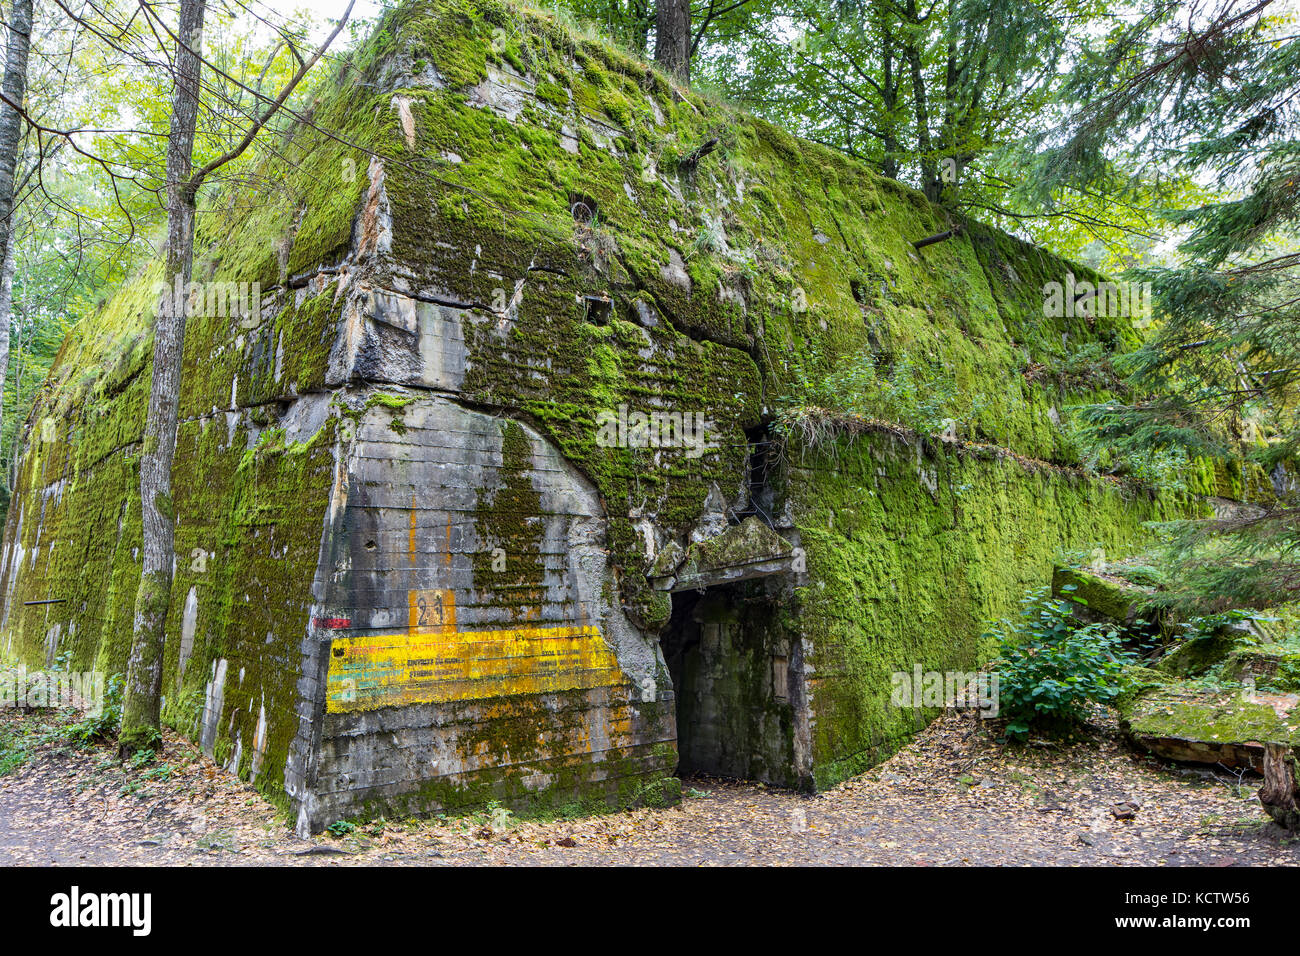 Rastenburg East Prussia High Resolution Stock Photography and Images - Alamy